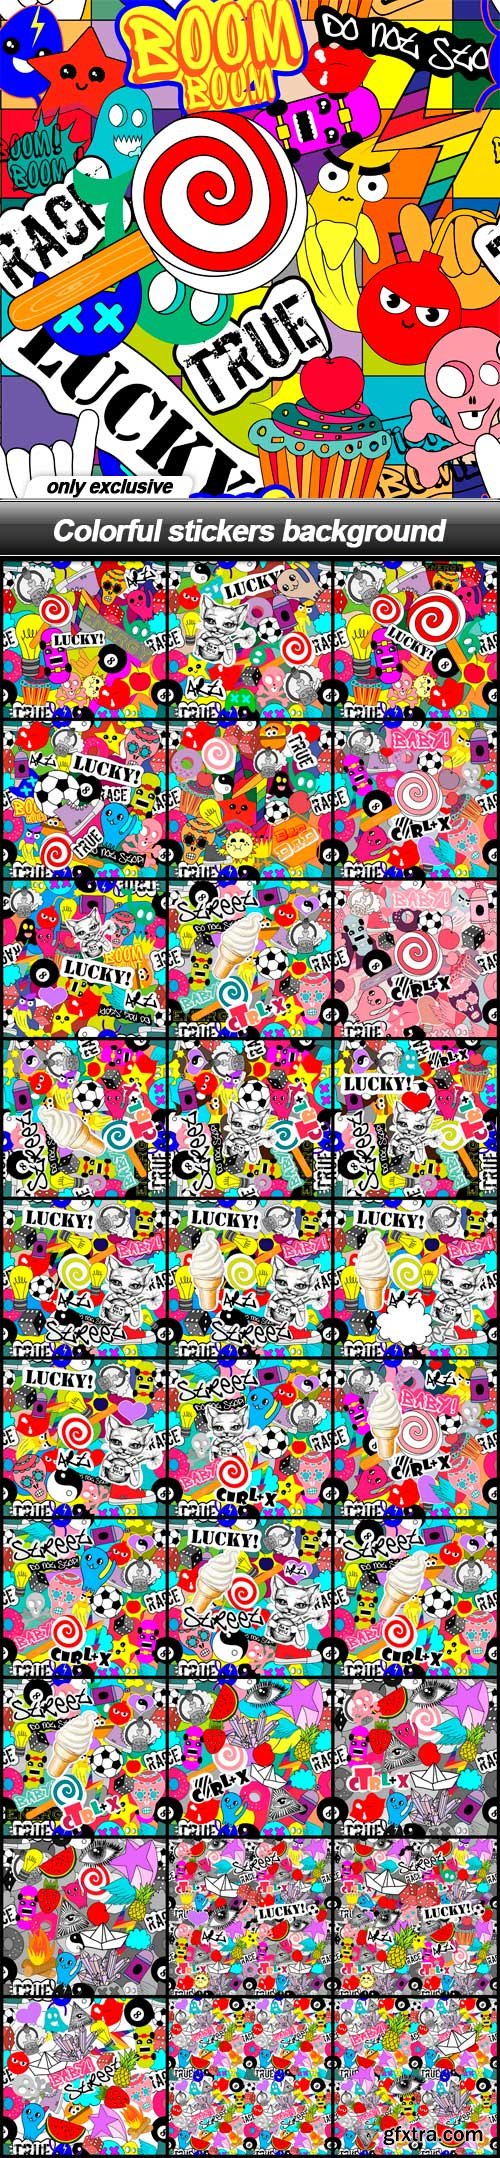 Colorful stickers background - 31 EPS